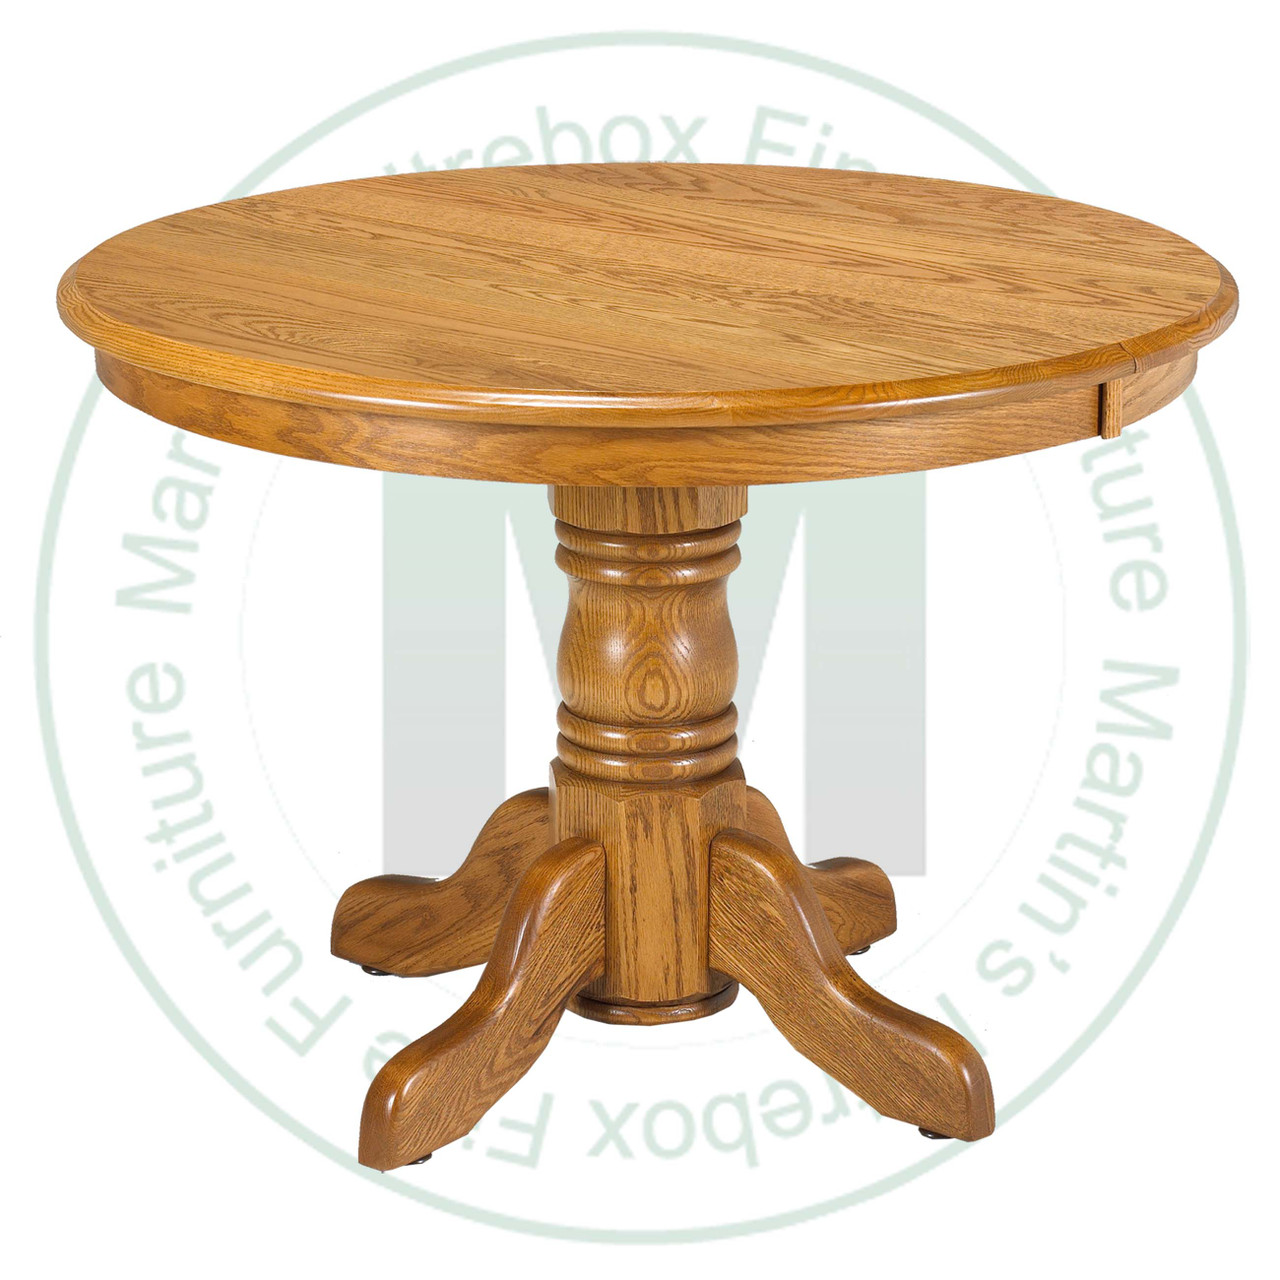 Oak Lancaster Collection Single Pedestal Table 36''D x 36''W x 30''H  Round Solid Table. Table Has 1.25'' Thick Top